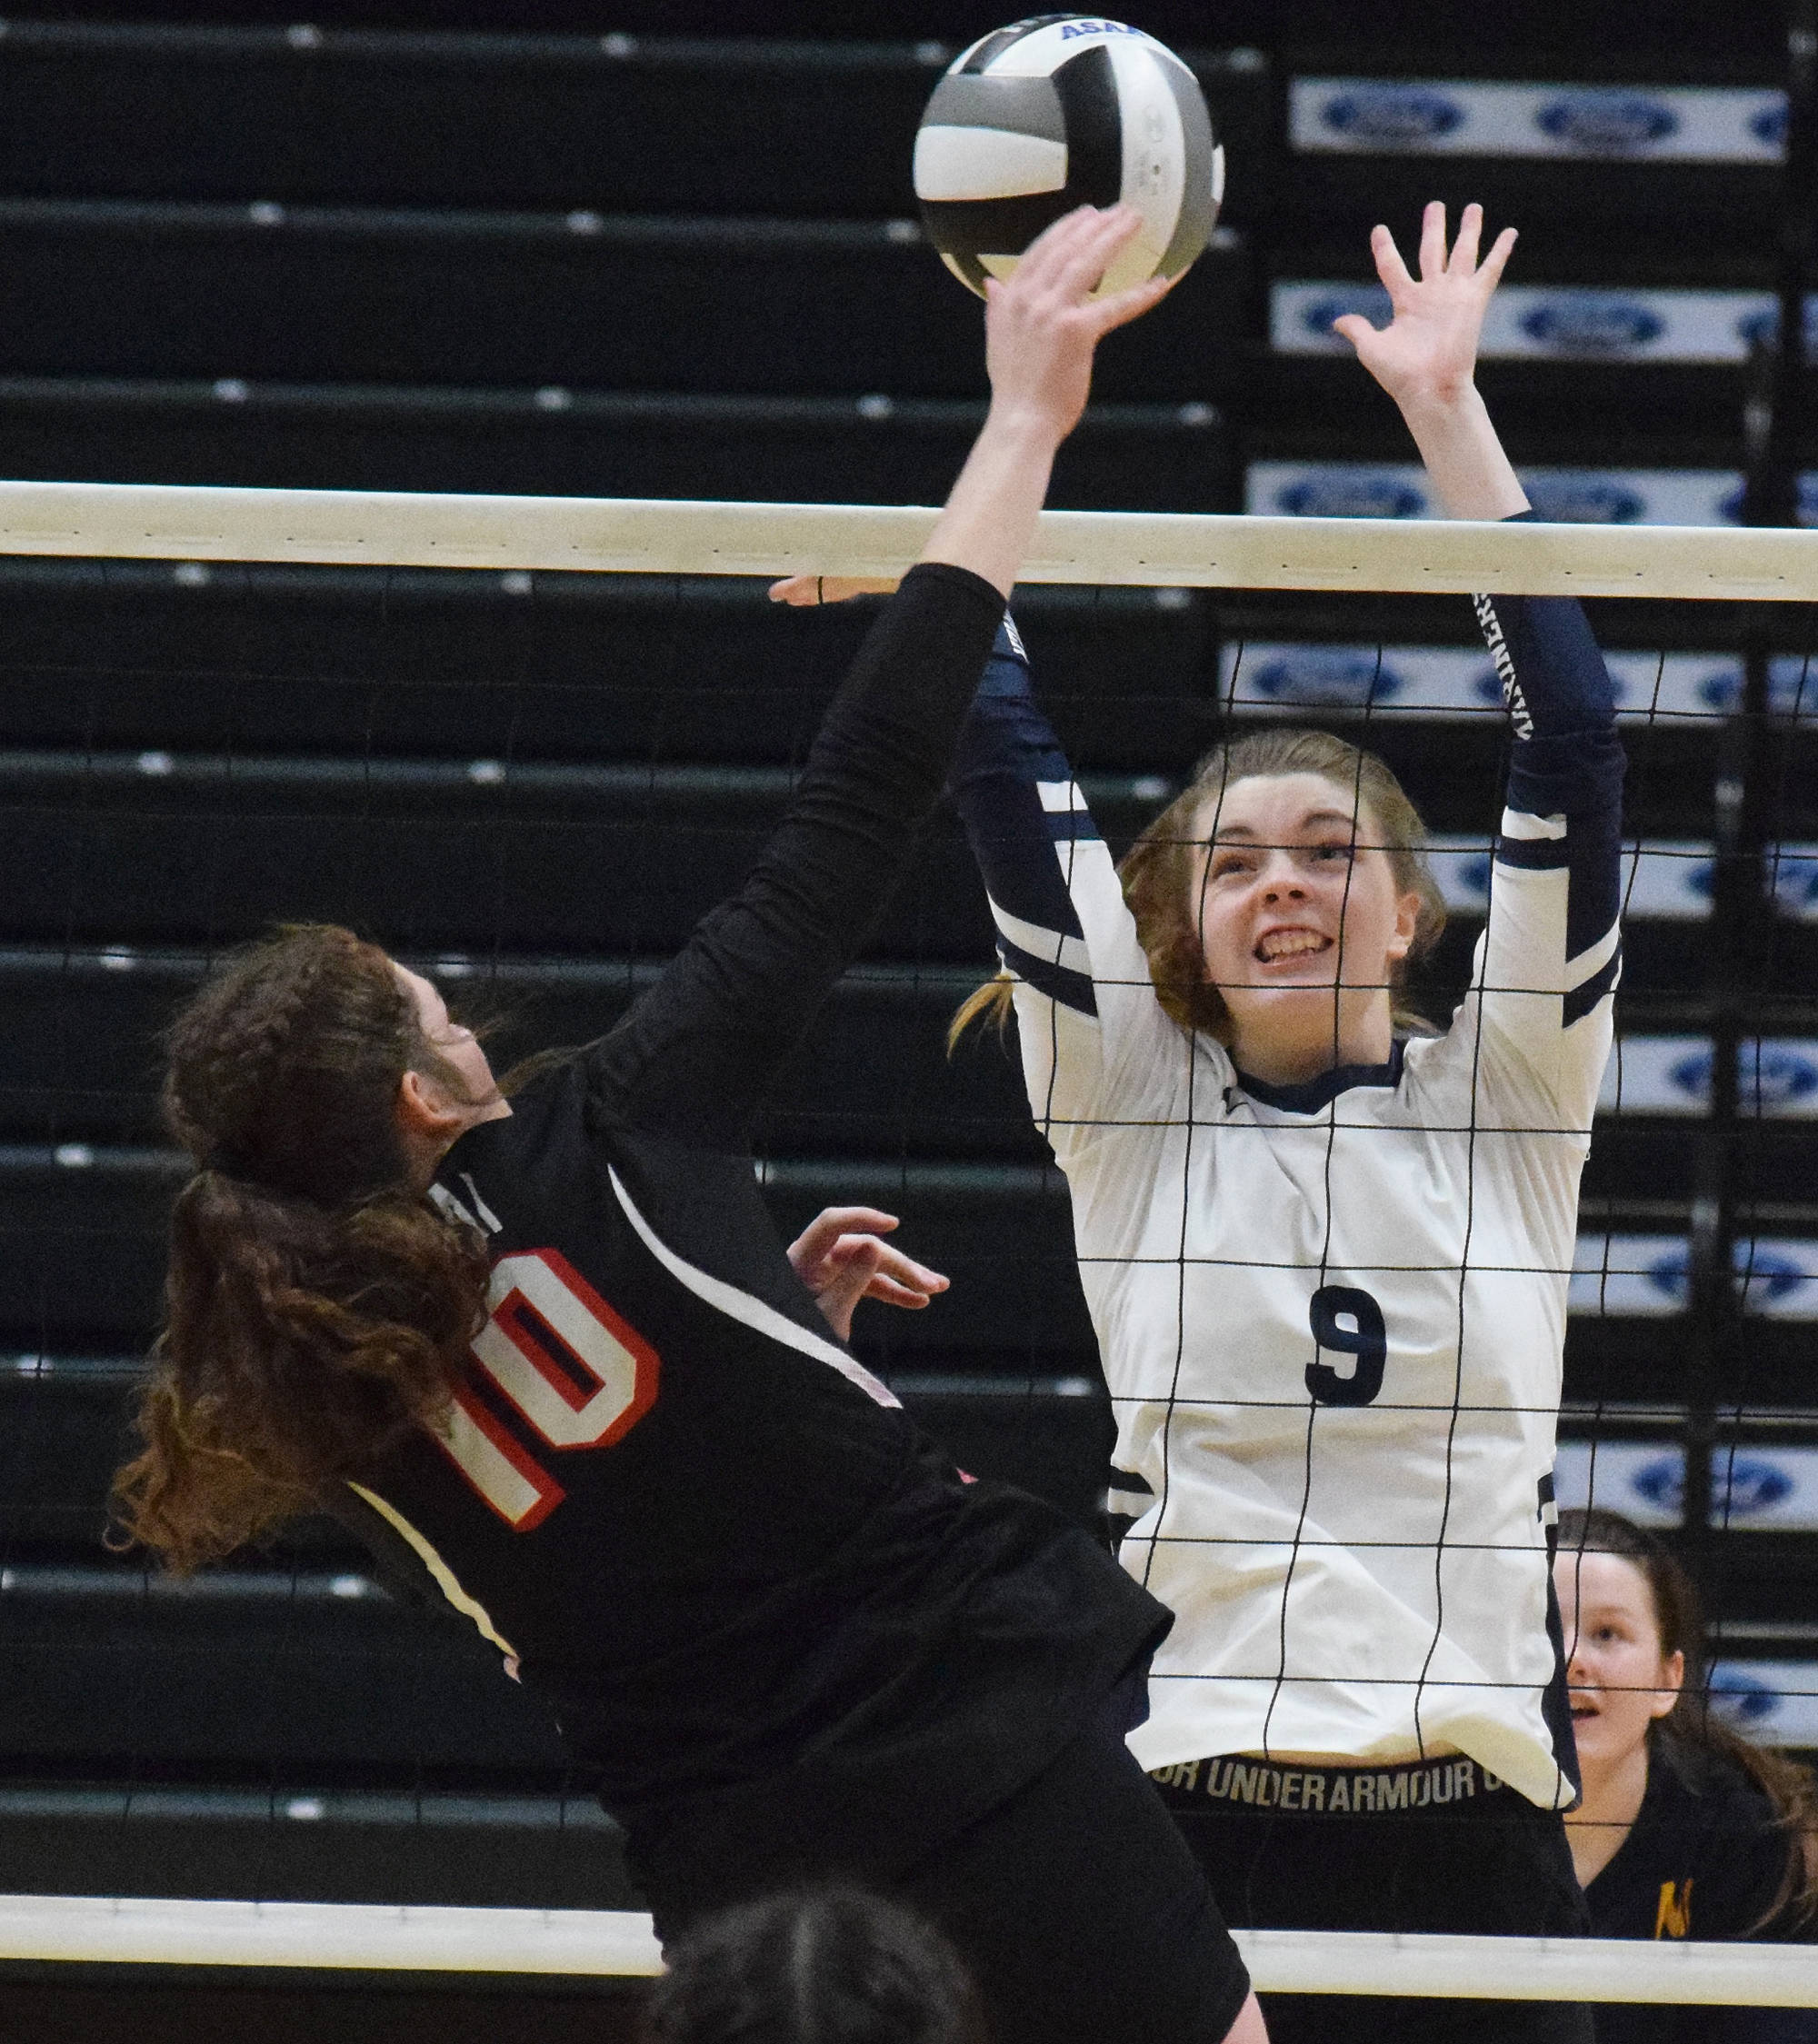 Homer’s Karmyn Gallios puts a block on Kenai’s Abby Every, Saturday, Nov. 16, 2019, at the Class 3A state volleyball tournament at the Alaska Airlines Center in Anchorage, Alaska. (Photo by Joey Klecka/Peninsula Clarion)